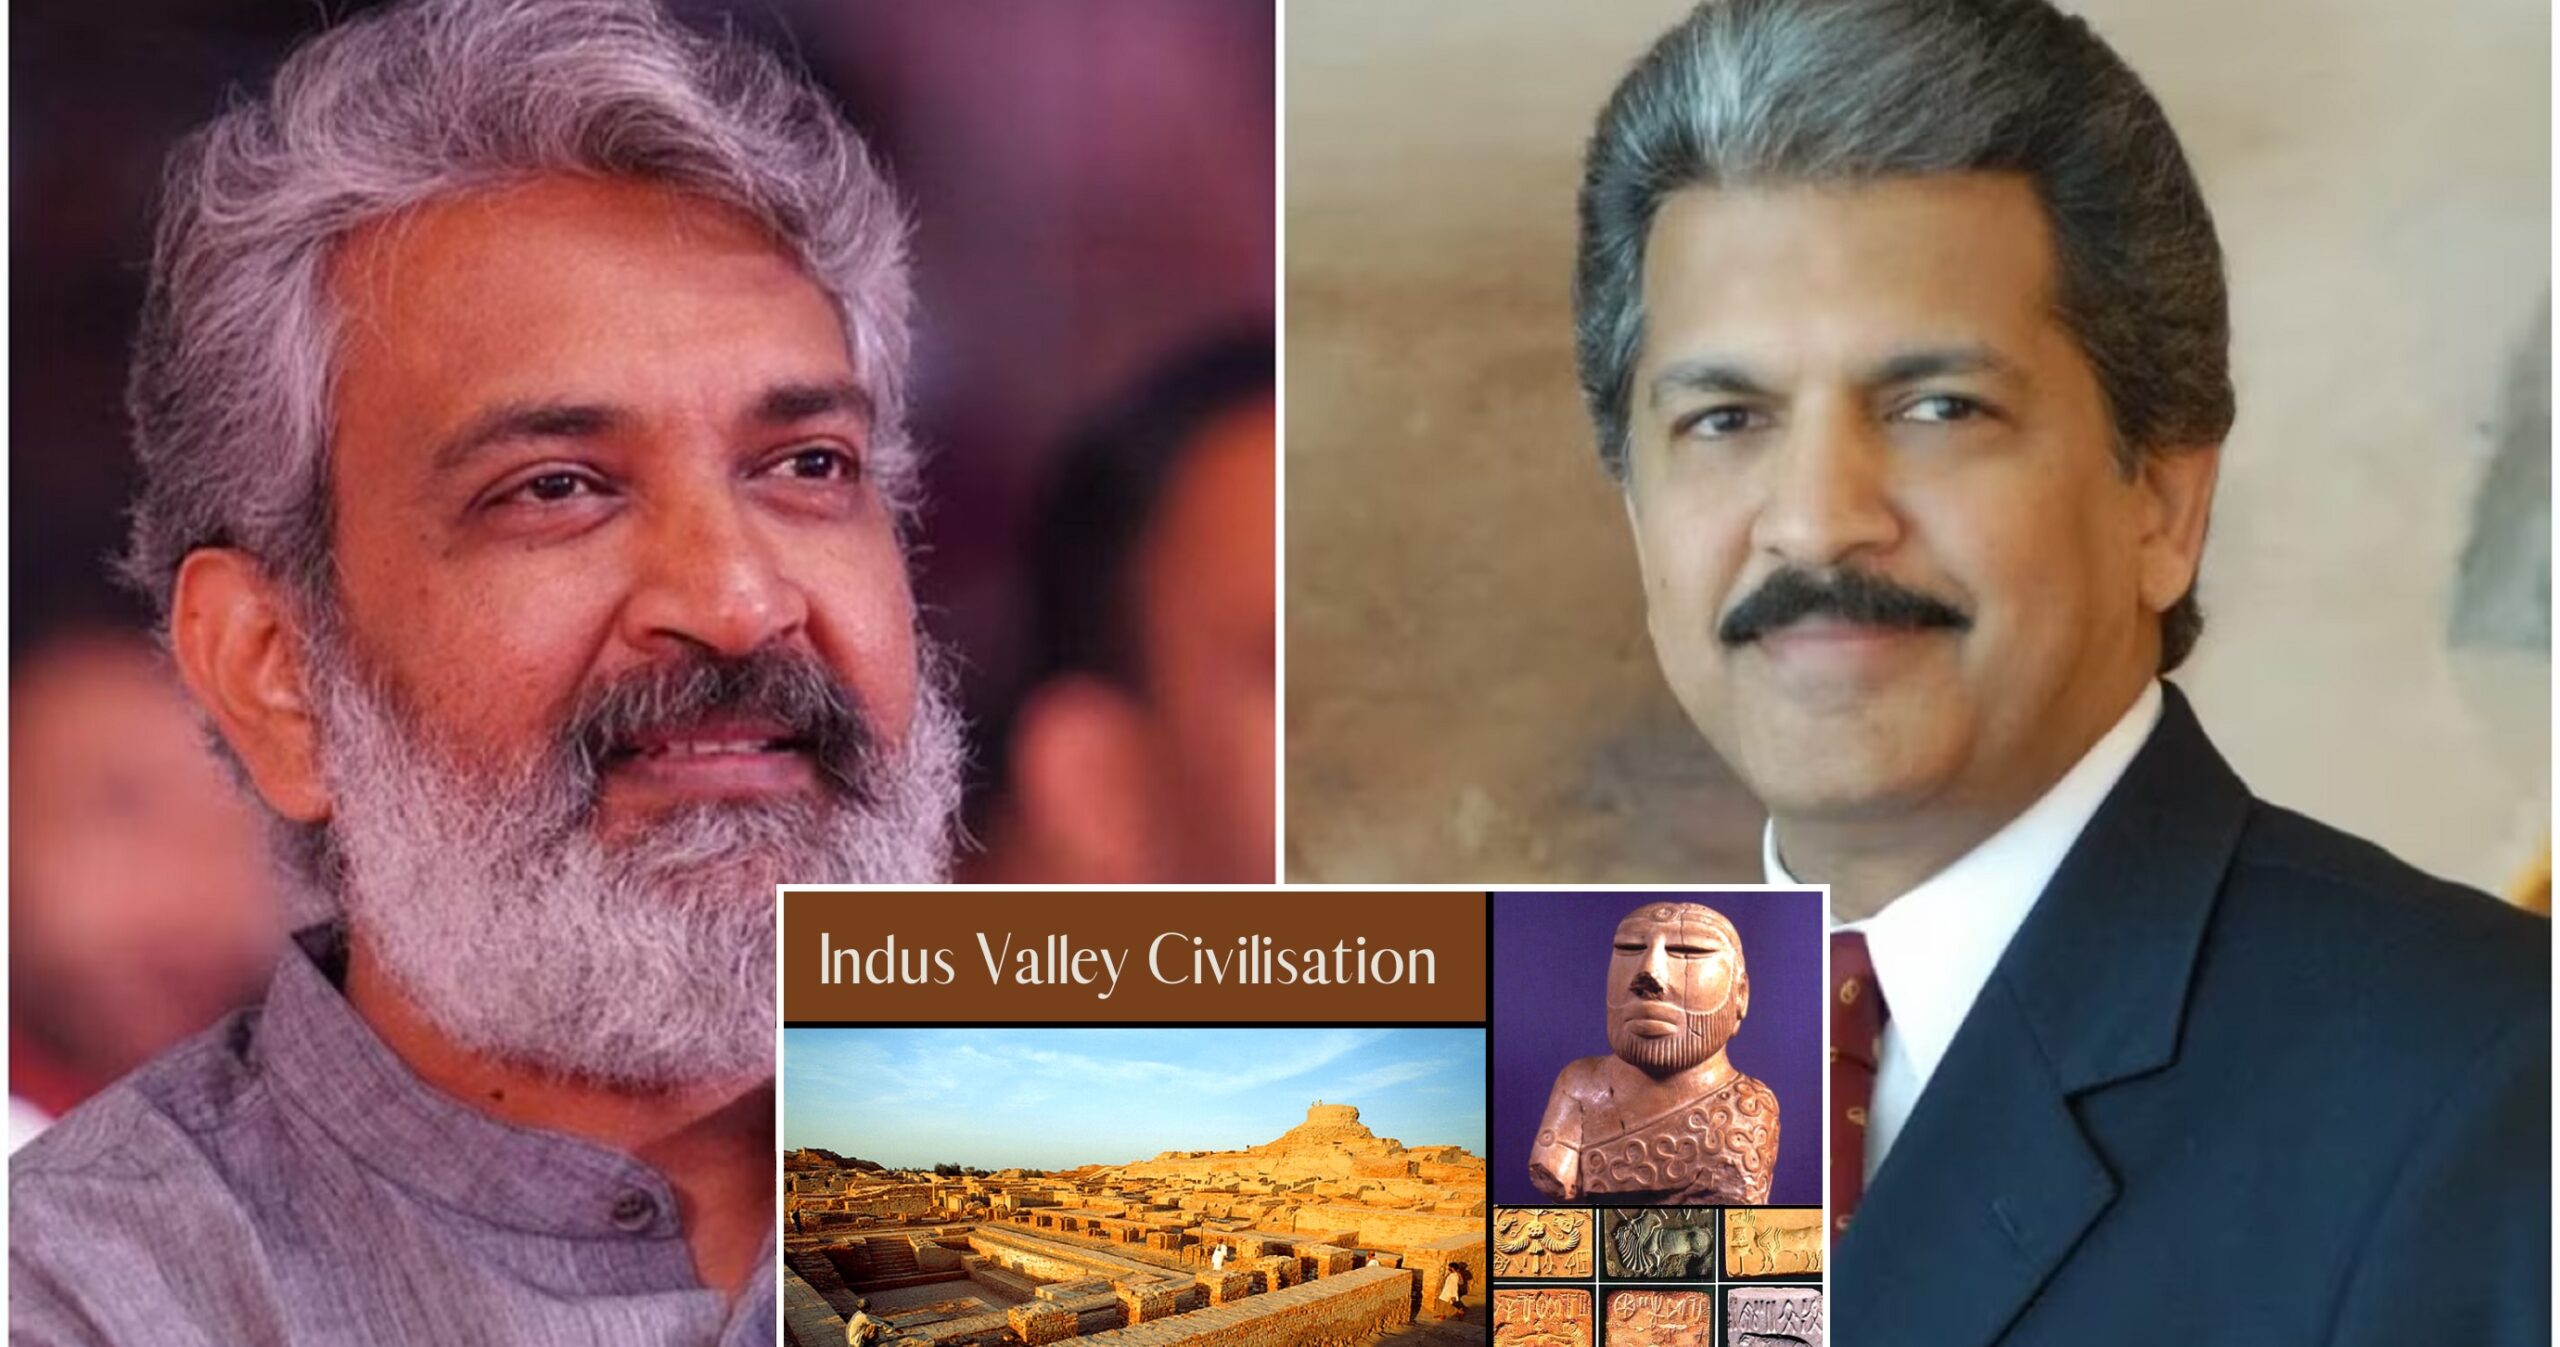 Anand Mahindra Says He Wants SS Rajamouli To Make Film On Indus Valley Civilization & He Replies…